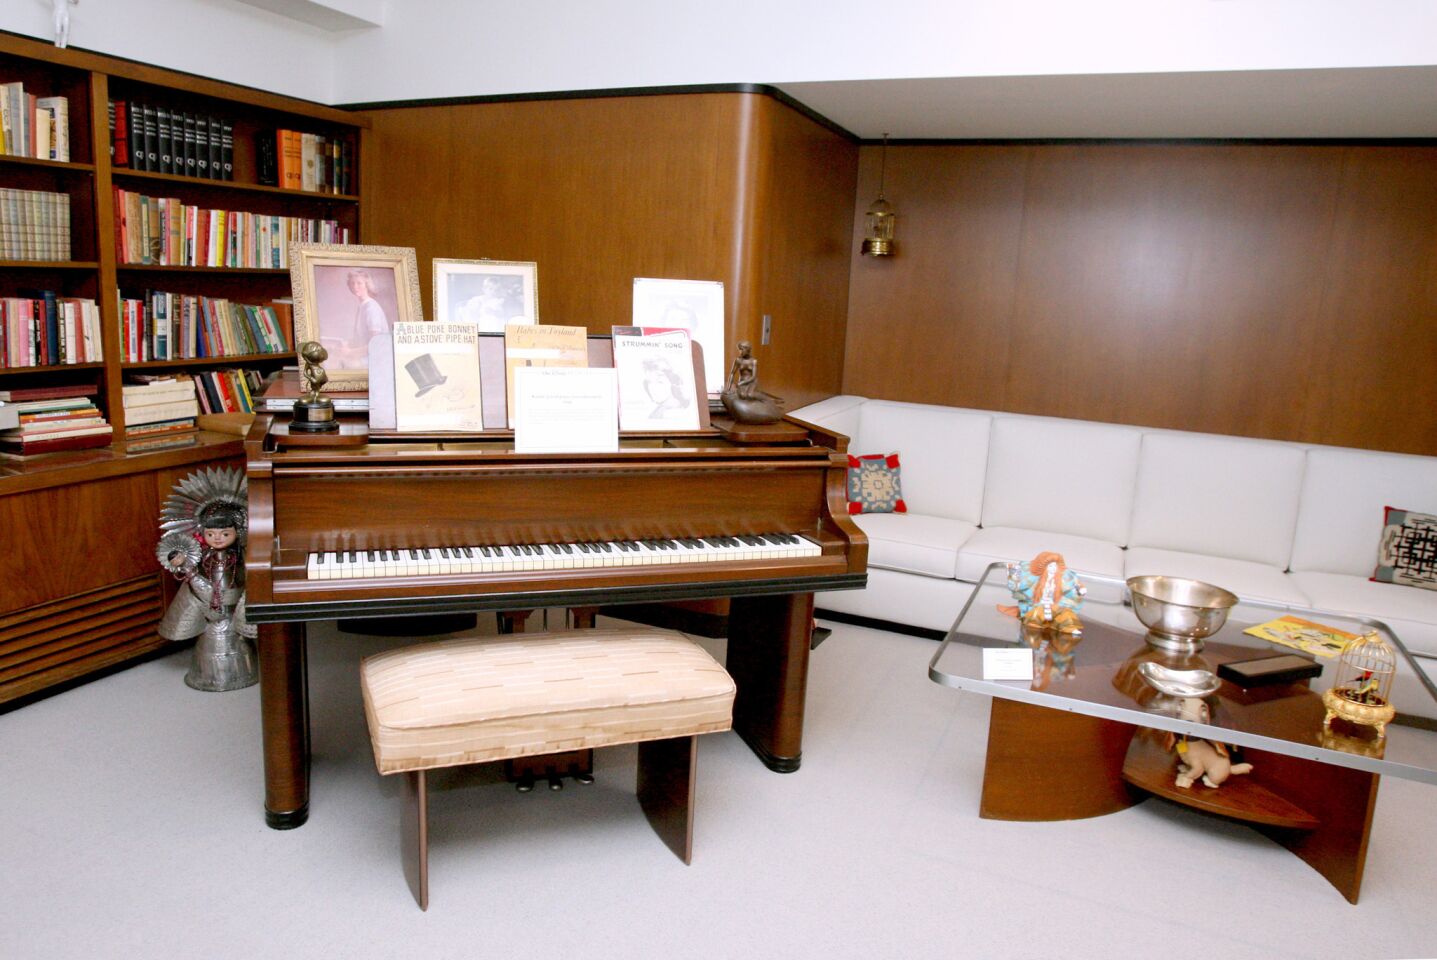 To celebrate the 75th anniversary of the Walt Disney Studios in Burbank, the walt Disney Archives restored Walt Disney's original office suite, which was shown to members of the media on Tuesday, December 22, 2015. Above, the piano where composers used to play their songs for Walt Disney.The space is located in the original Animation building and was occupied by Walt Disney from 1940 to 1966, when he passed away at the age of 65 from lung cancer. The permanent exhibit will be opened to Disney employees, cast members and studio visitors and it will be added to tours of the studio lot that gold members of the official fan club, D23, can take.